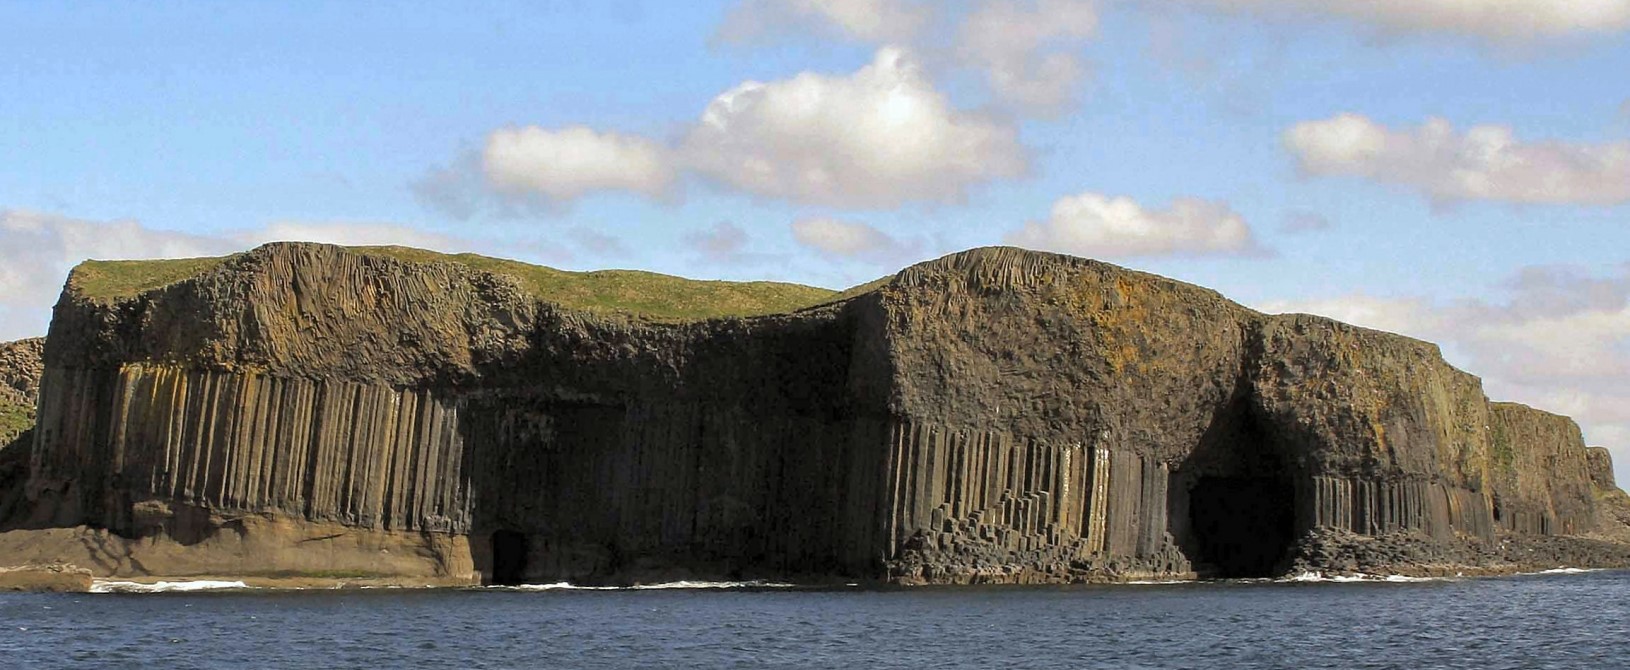  Views of the island of Staffa from aboard a local boat crossing from Fionnphort on the Isle of Mull